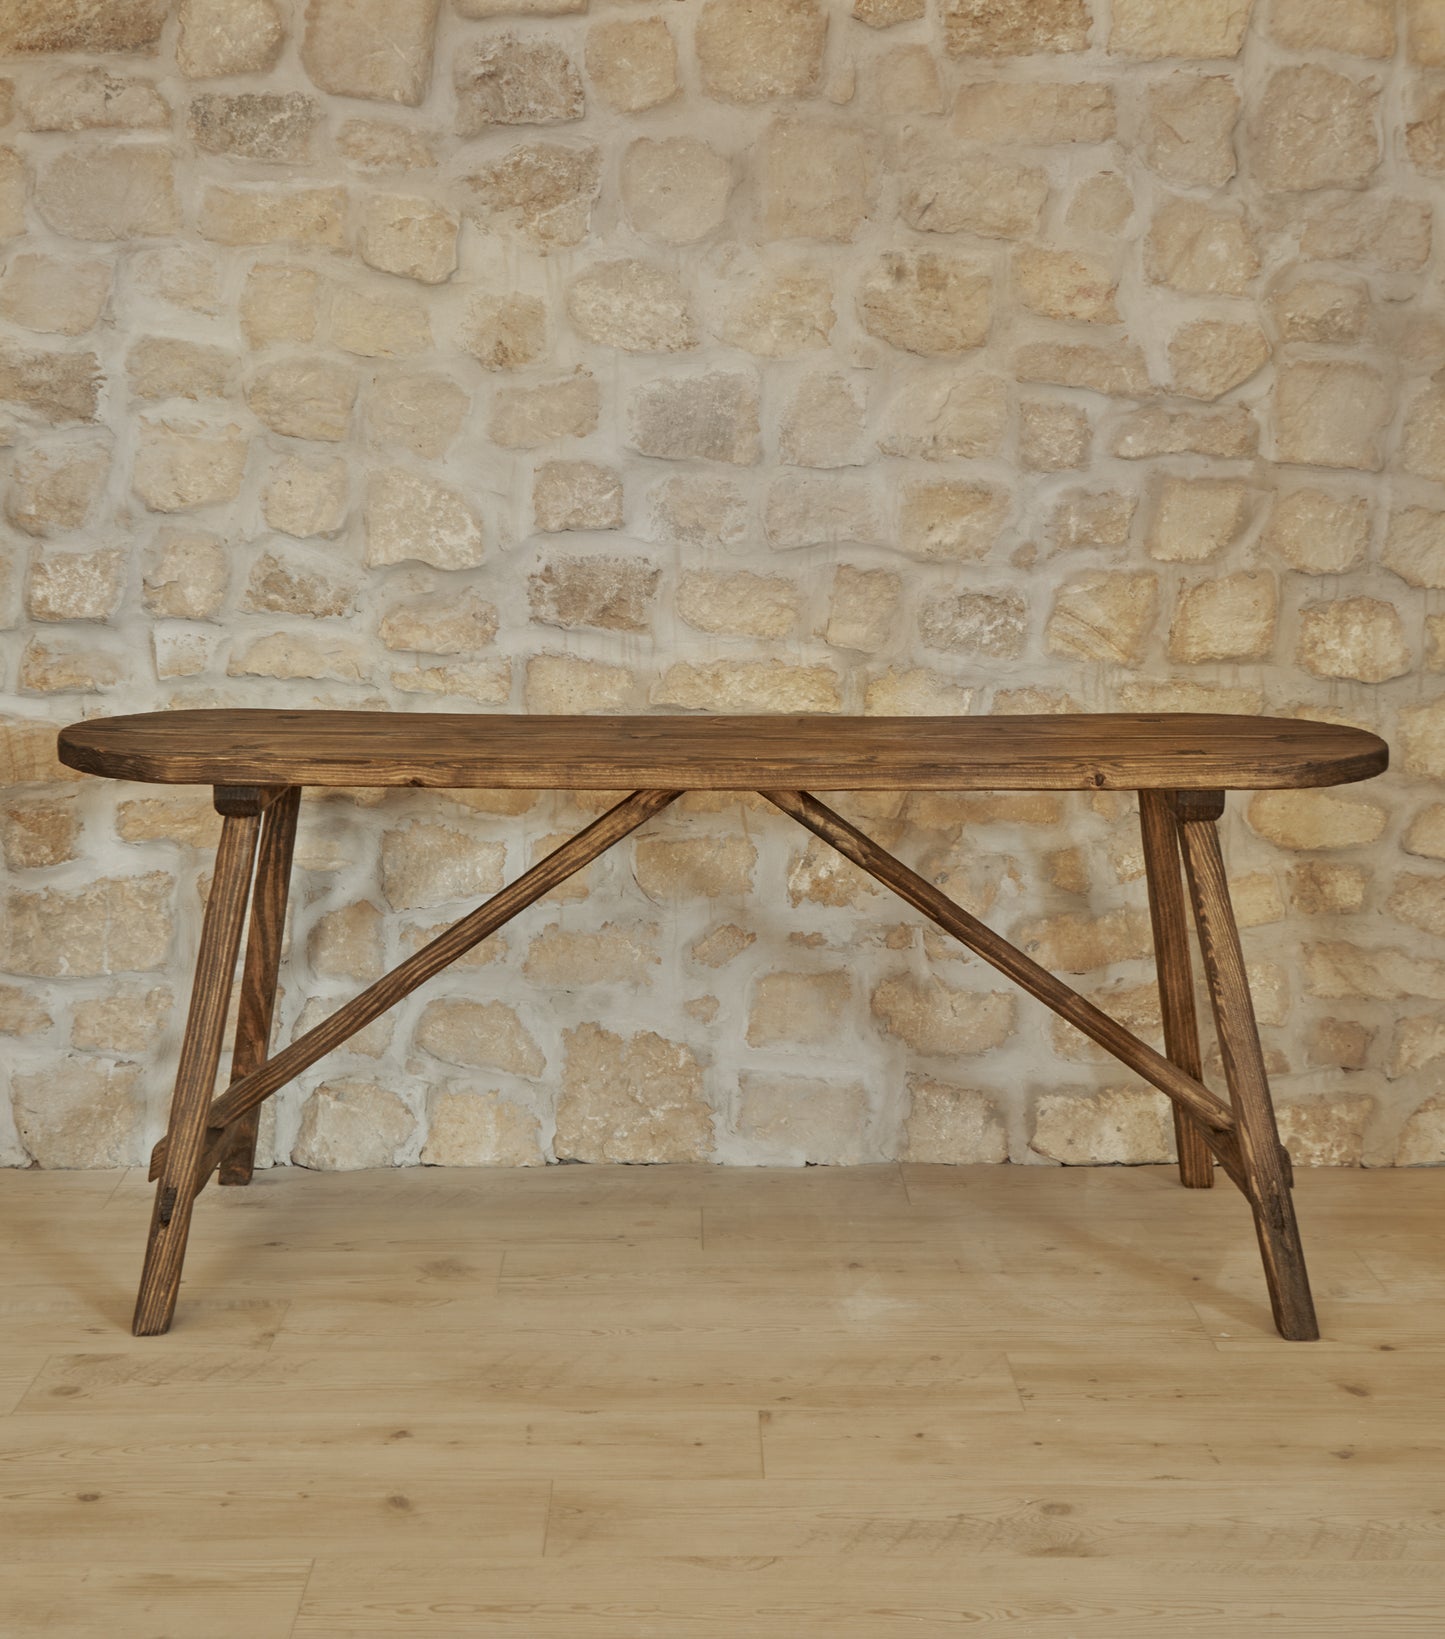 Ives Console Table